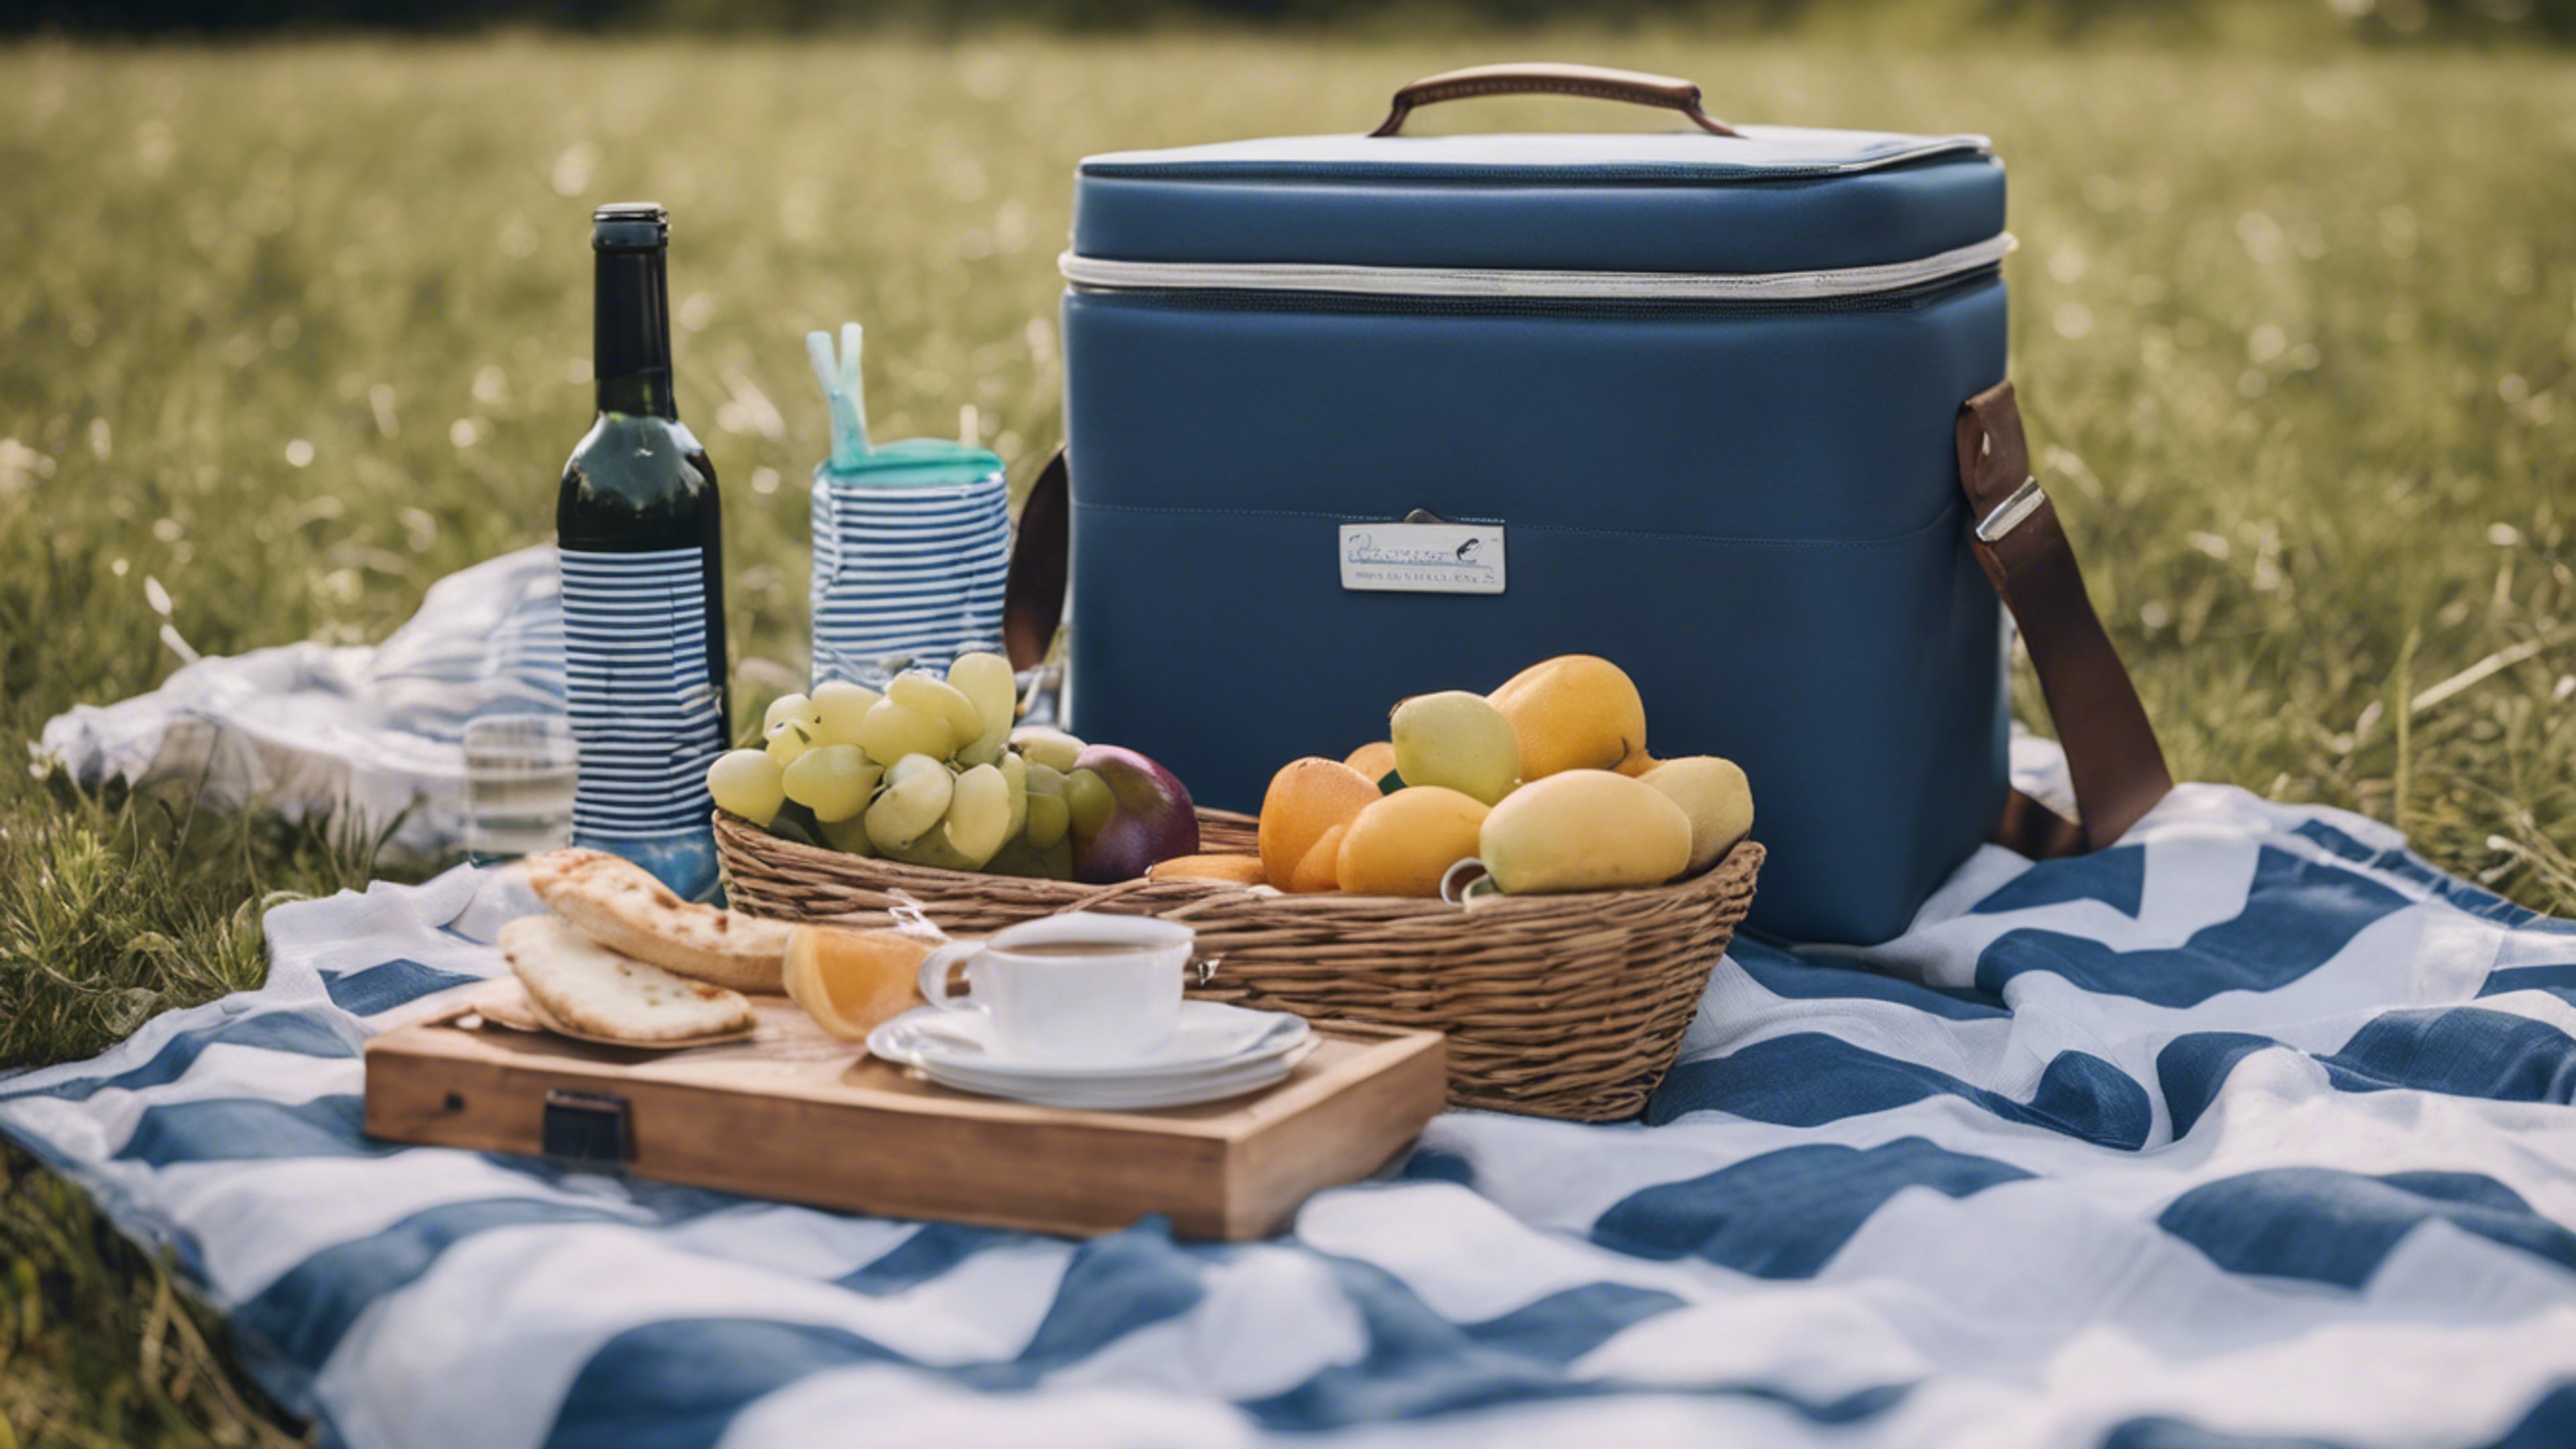 A preppy picnic setup in a grassy meadow, featuring a blue and white striped picnic blanket and matching cooler. วอลล์เปเปอร์[2c3aa7a20c924d6f9450]